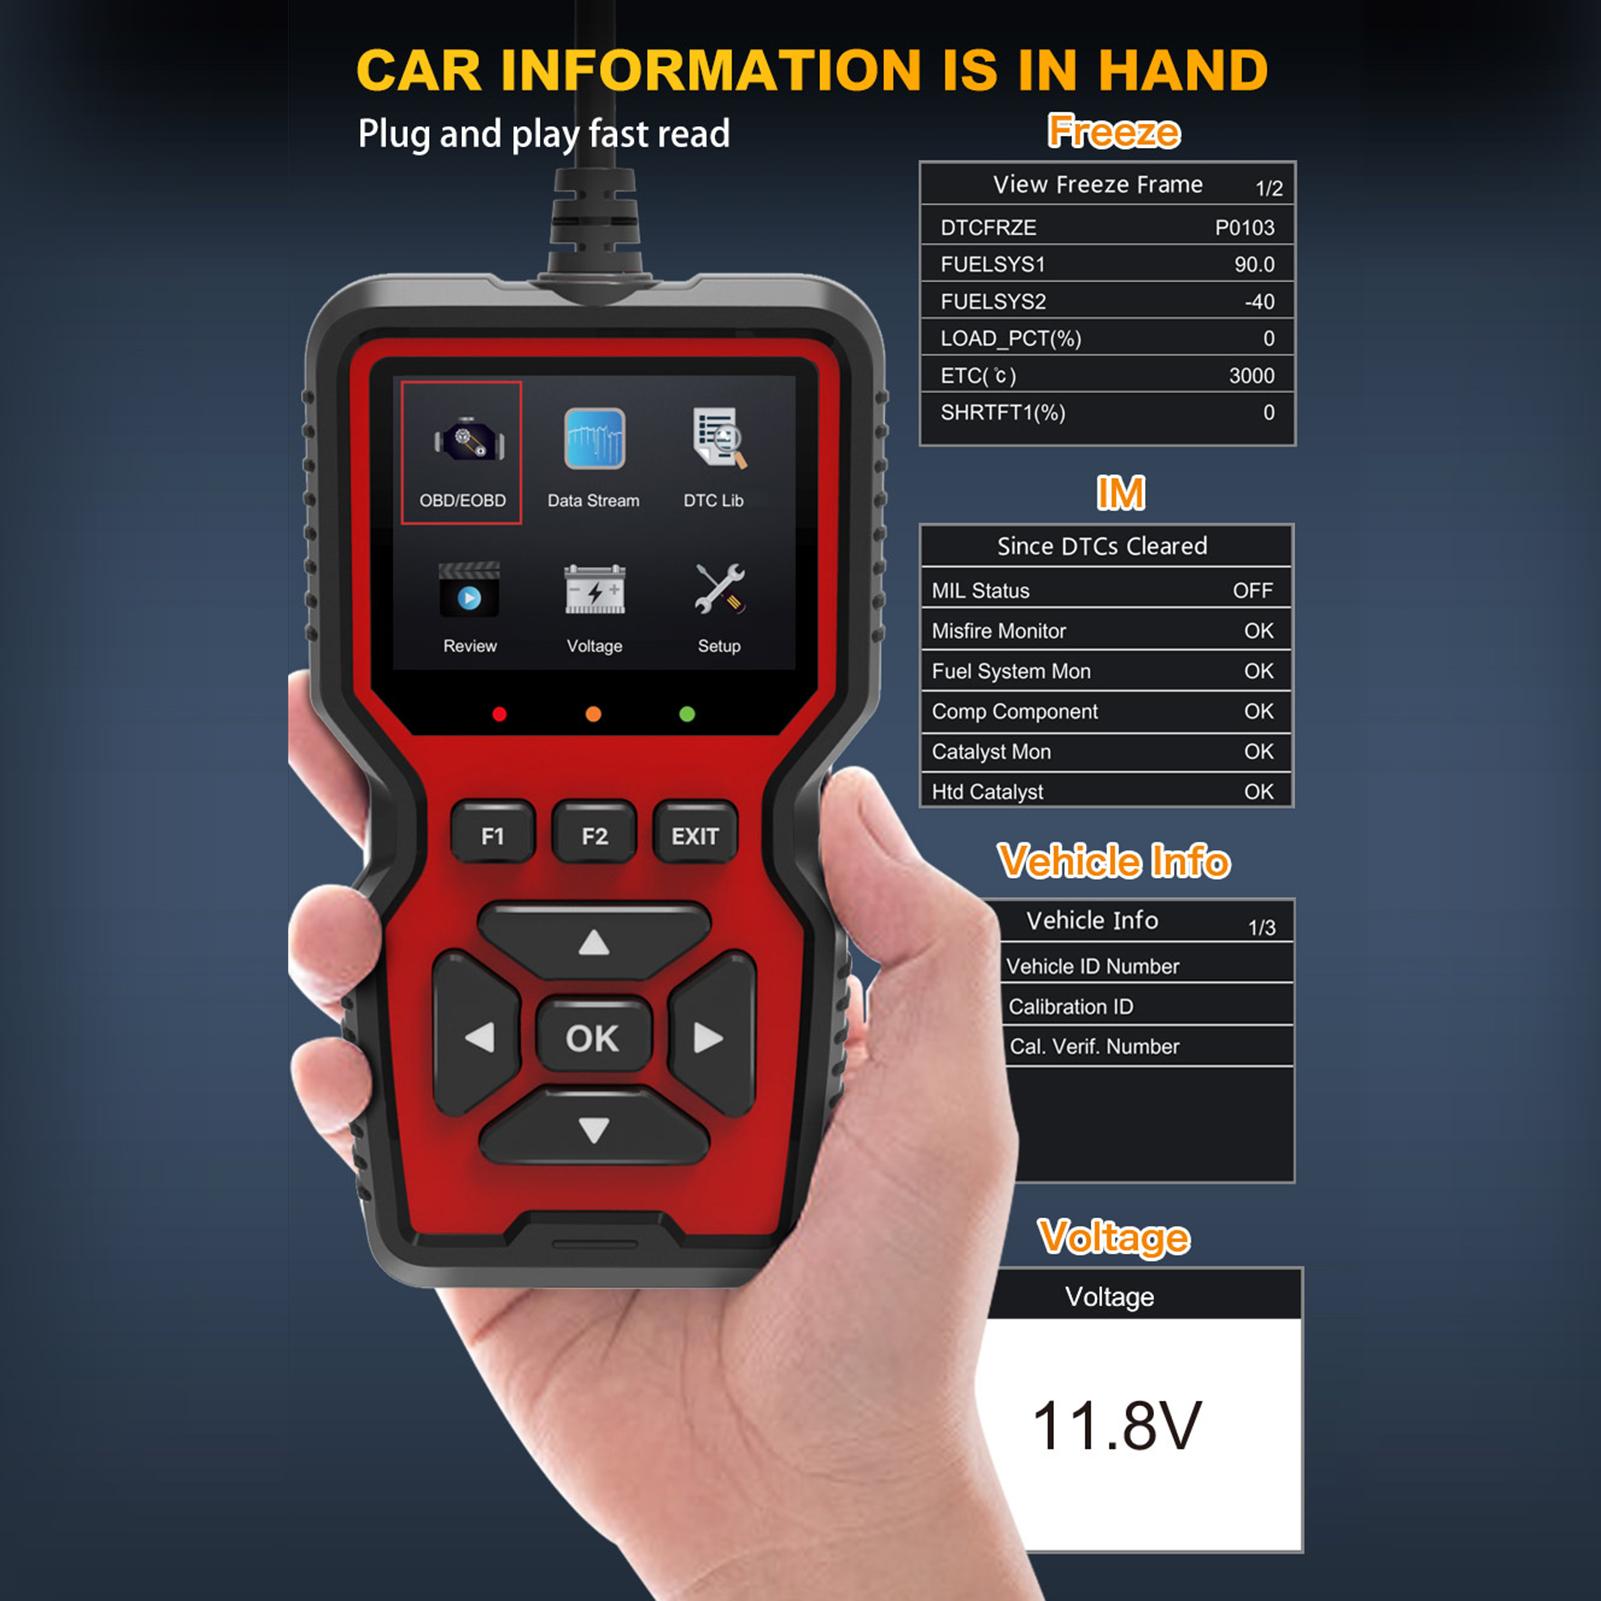 V519 OBDII Diagnostic Vehicle Code Reader Upgraged Support Printing Functions for All OBD II Protocol Cars Since 1996